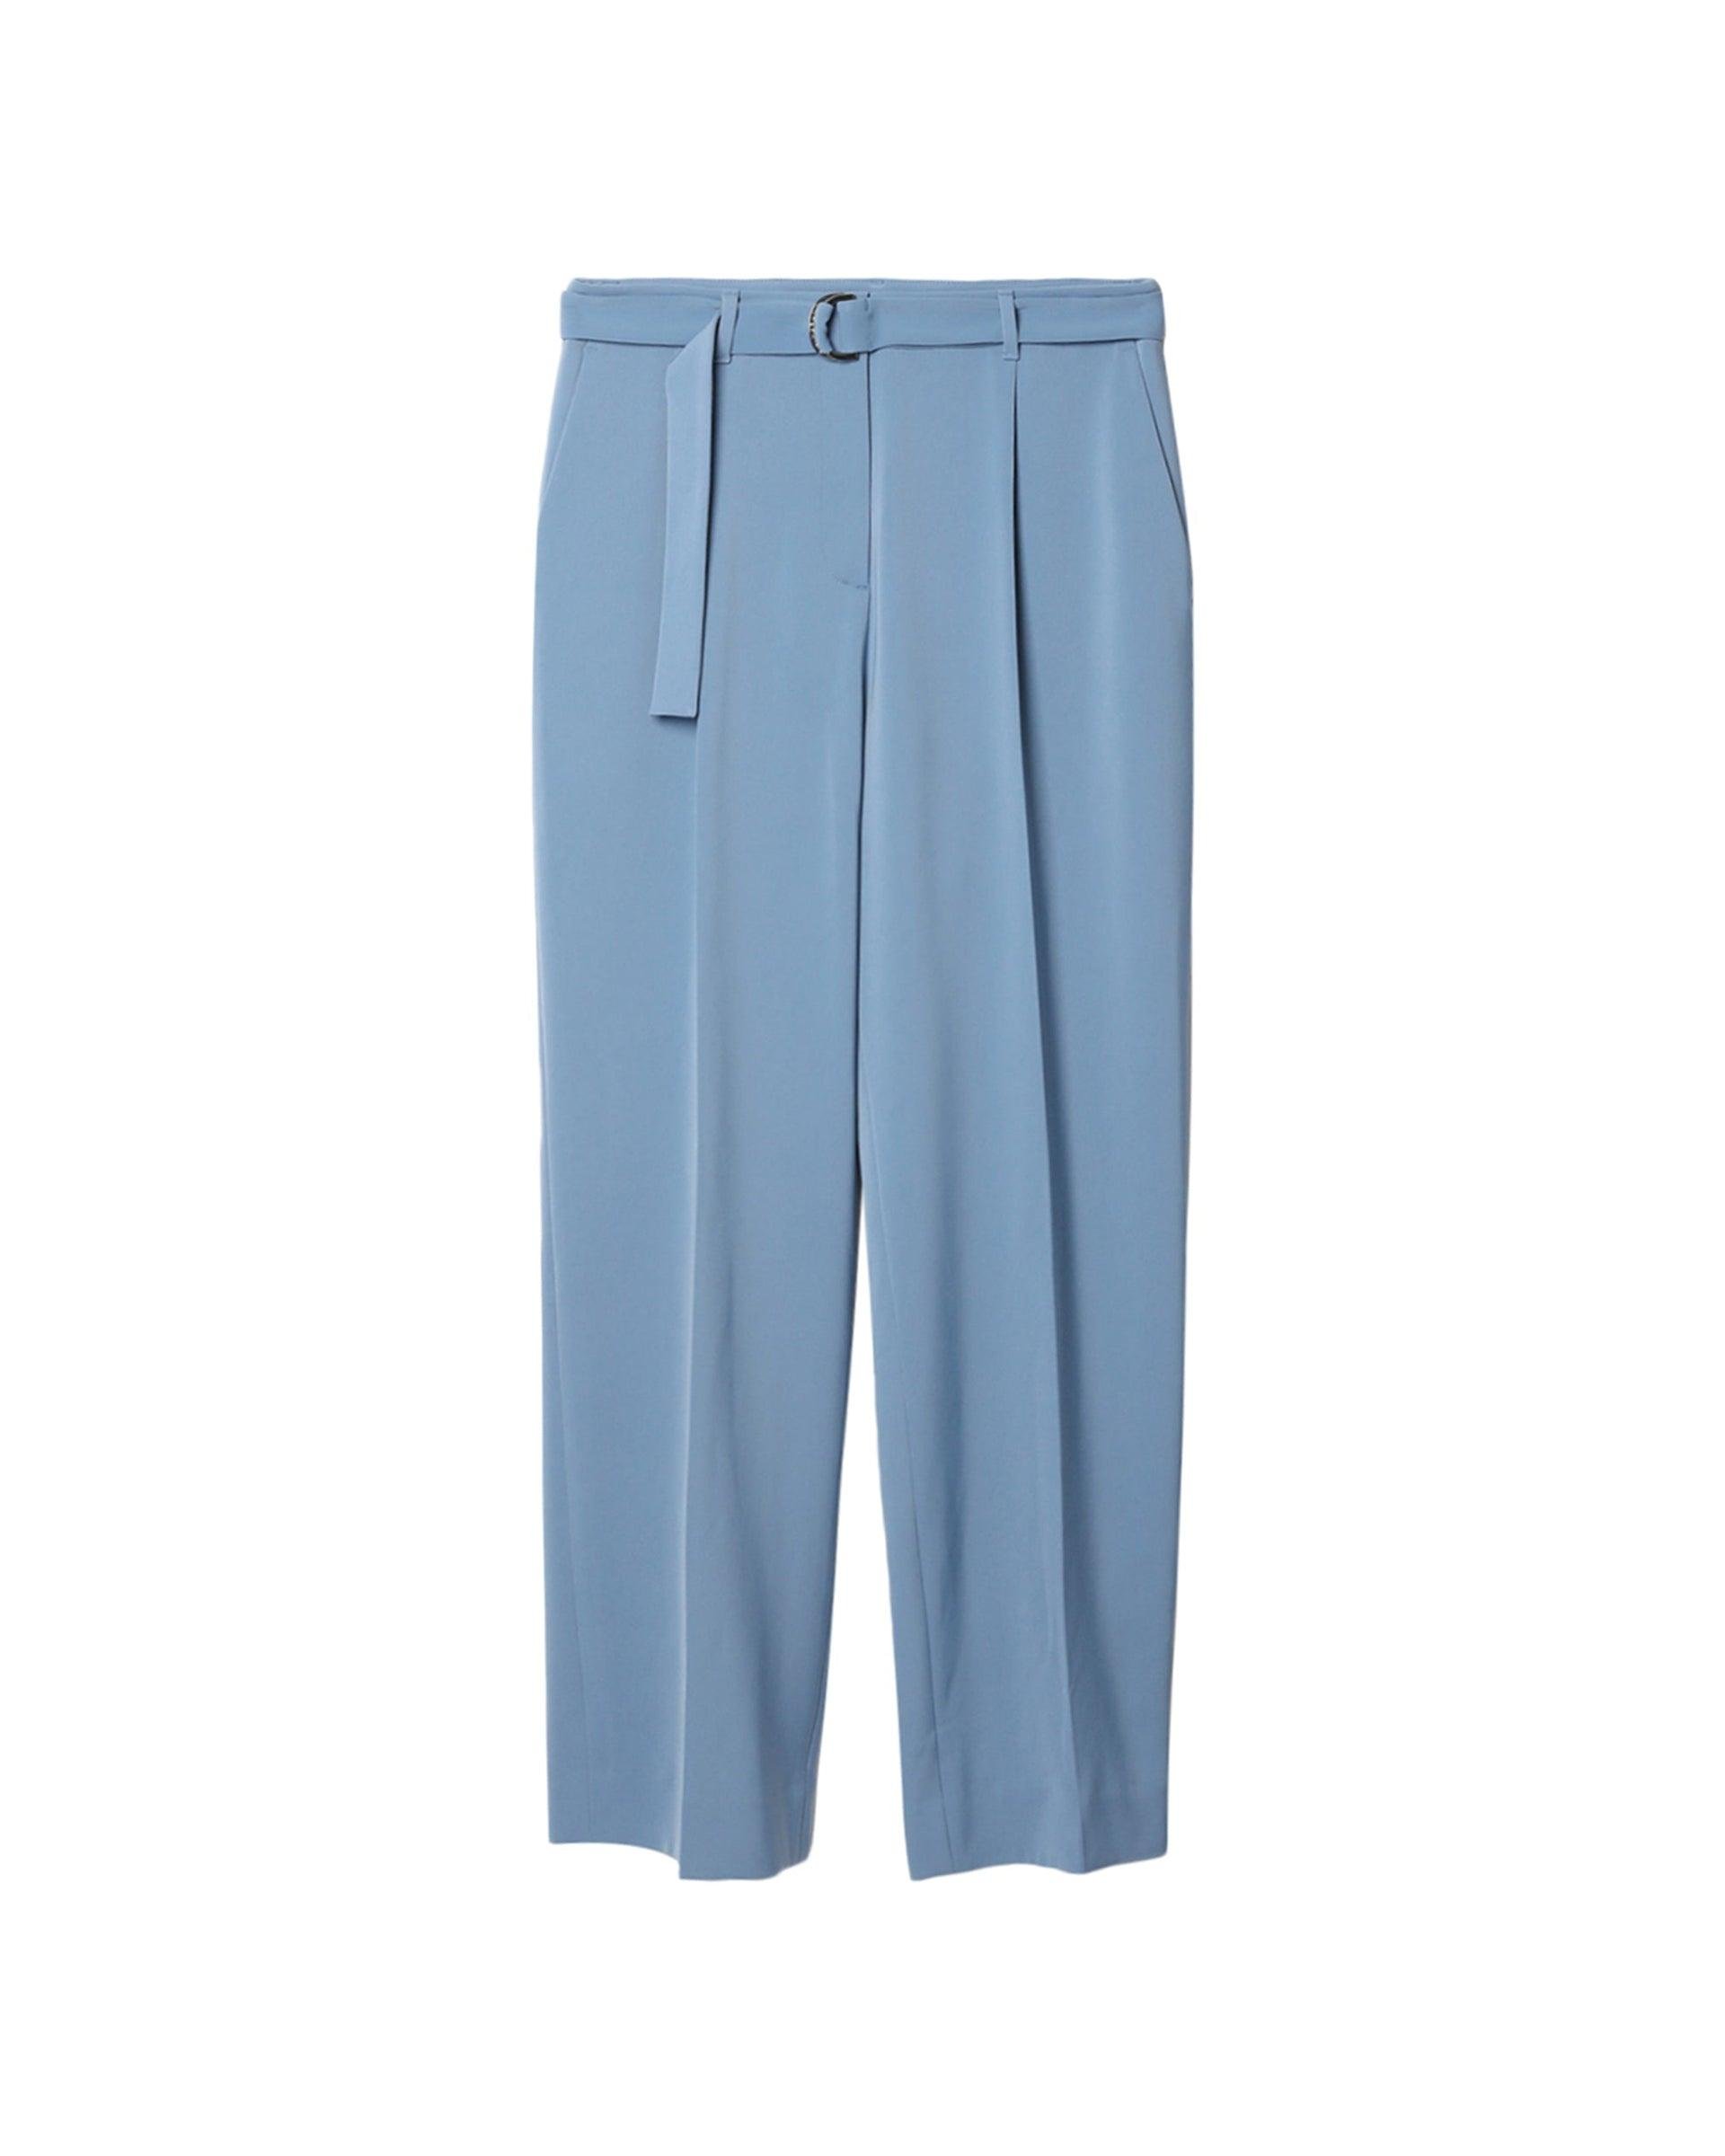 Easy Care Poly Pants by ANTEPRIMA